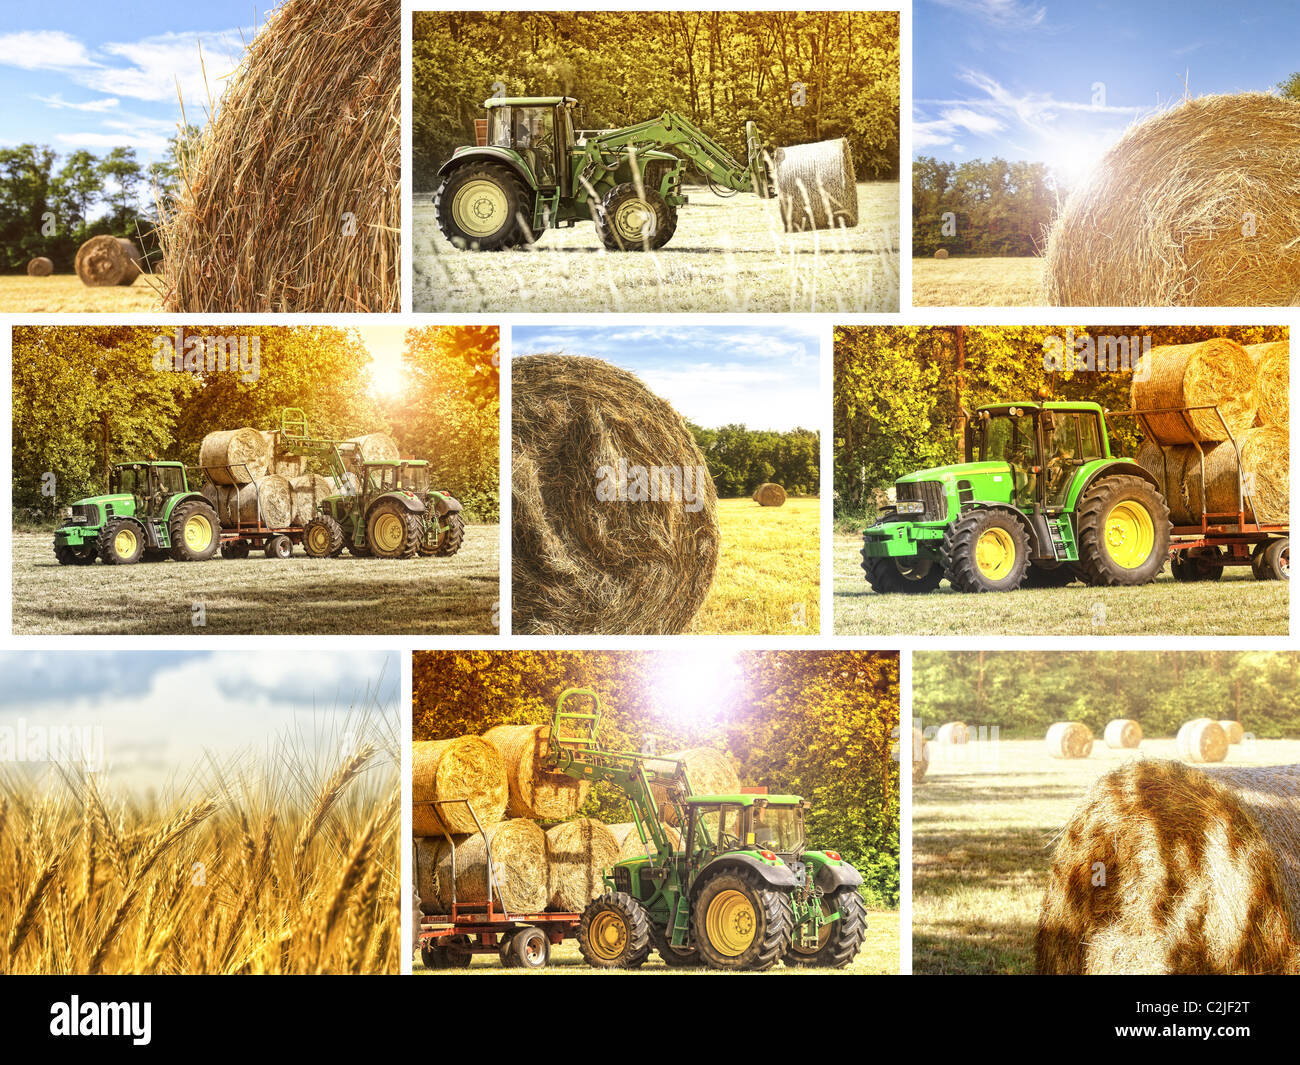 fine image of different agriculture work scene Stock Photo